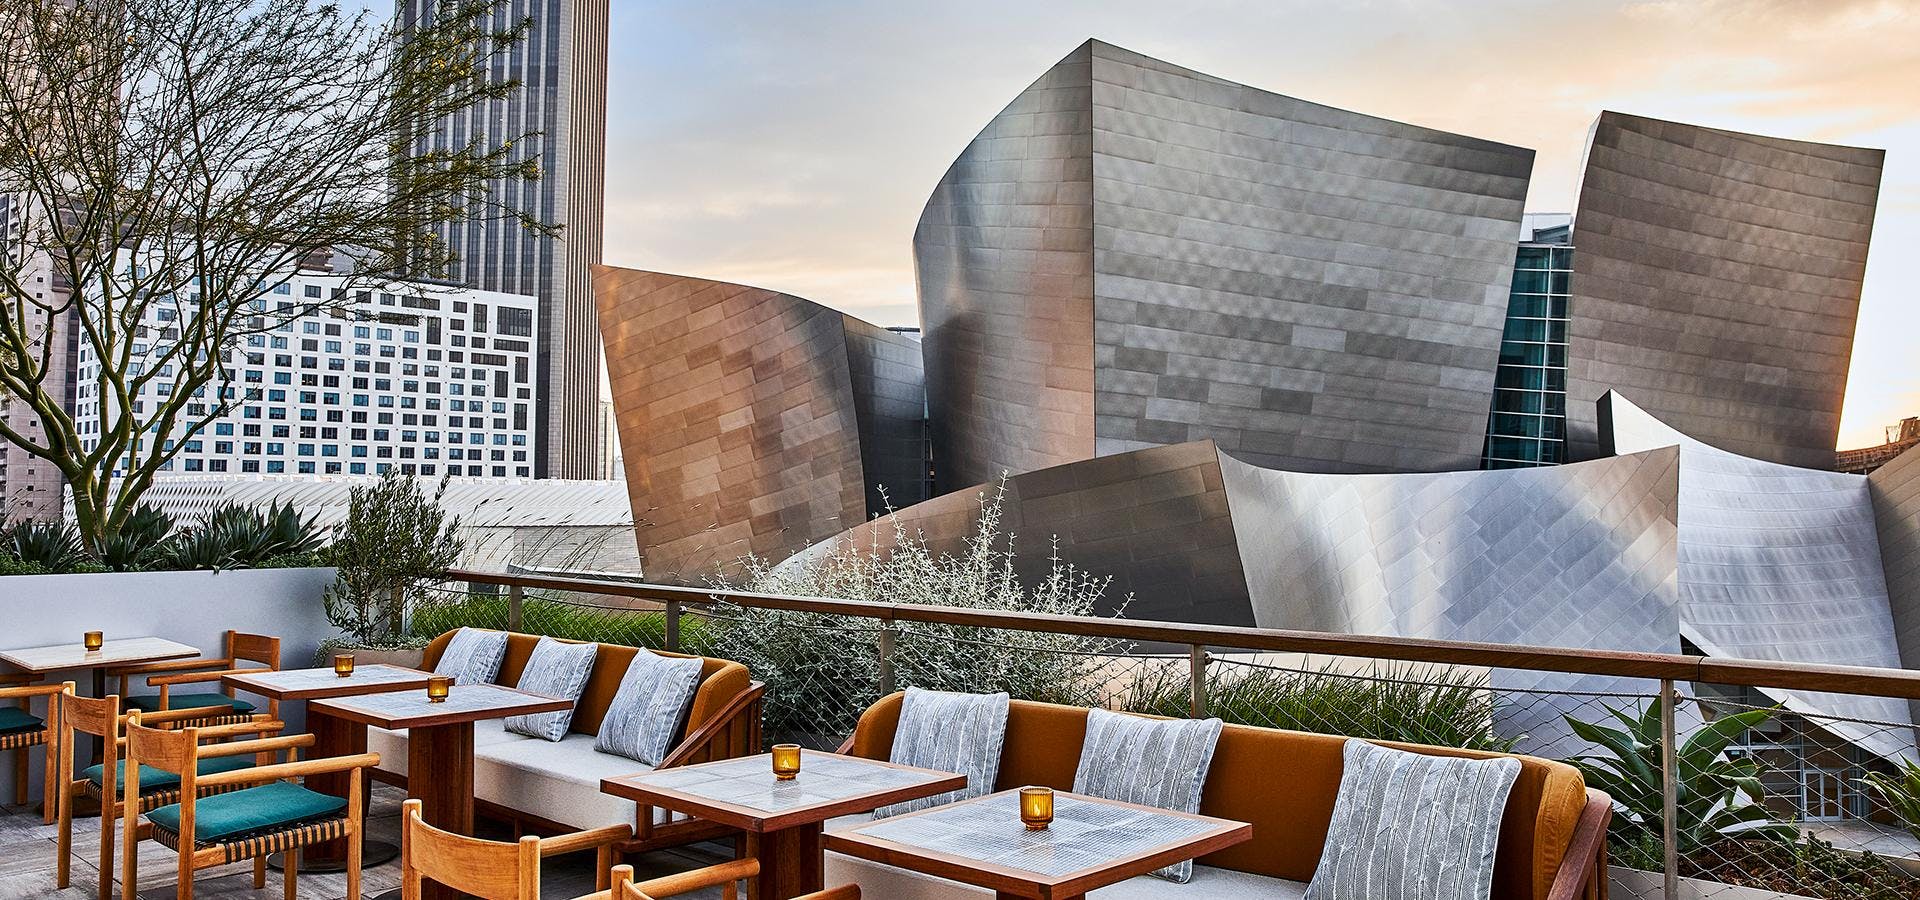 Frank Gehry's Walt Disney Concert Hall is a living room for Los Angeles